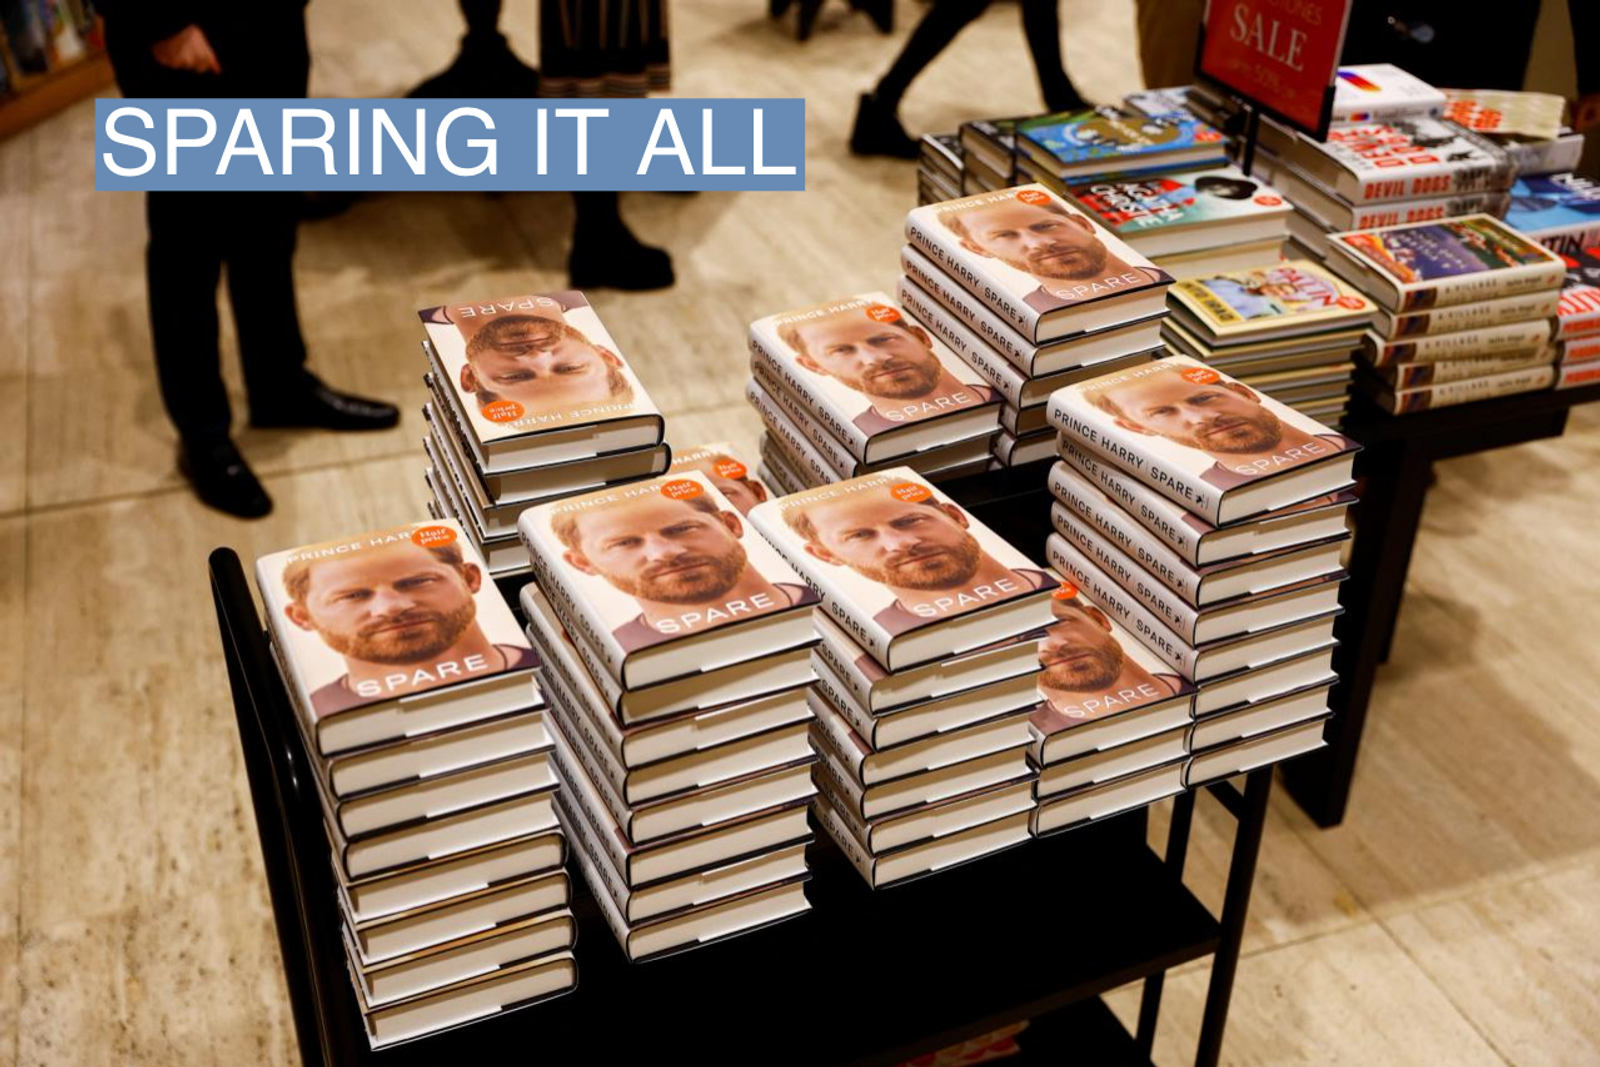 Copies of Britain's Prince Harry's autobiography 'Spare' are displayed at Waterstones bookstore, in London, Britain January 10, 2023.